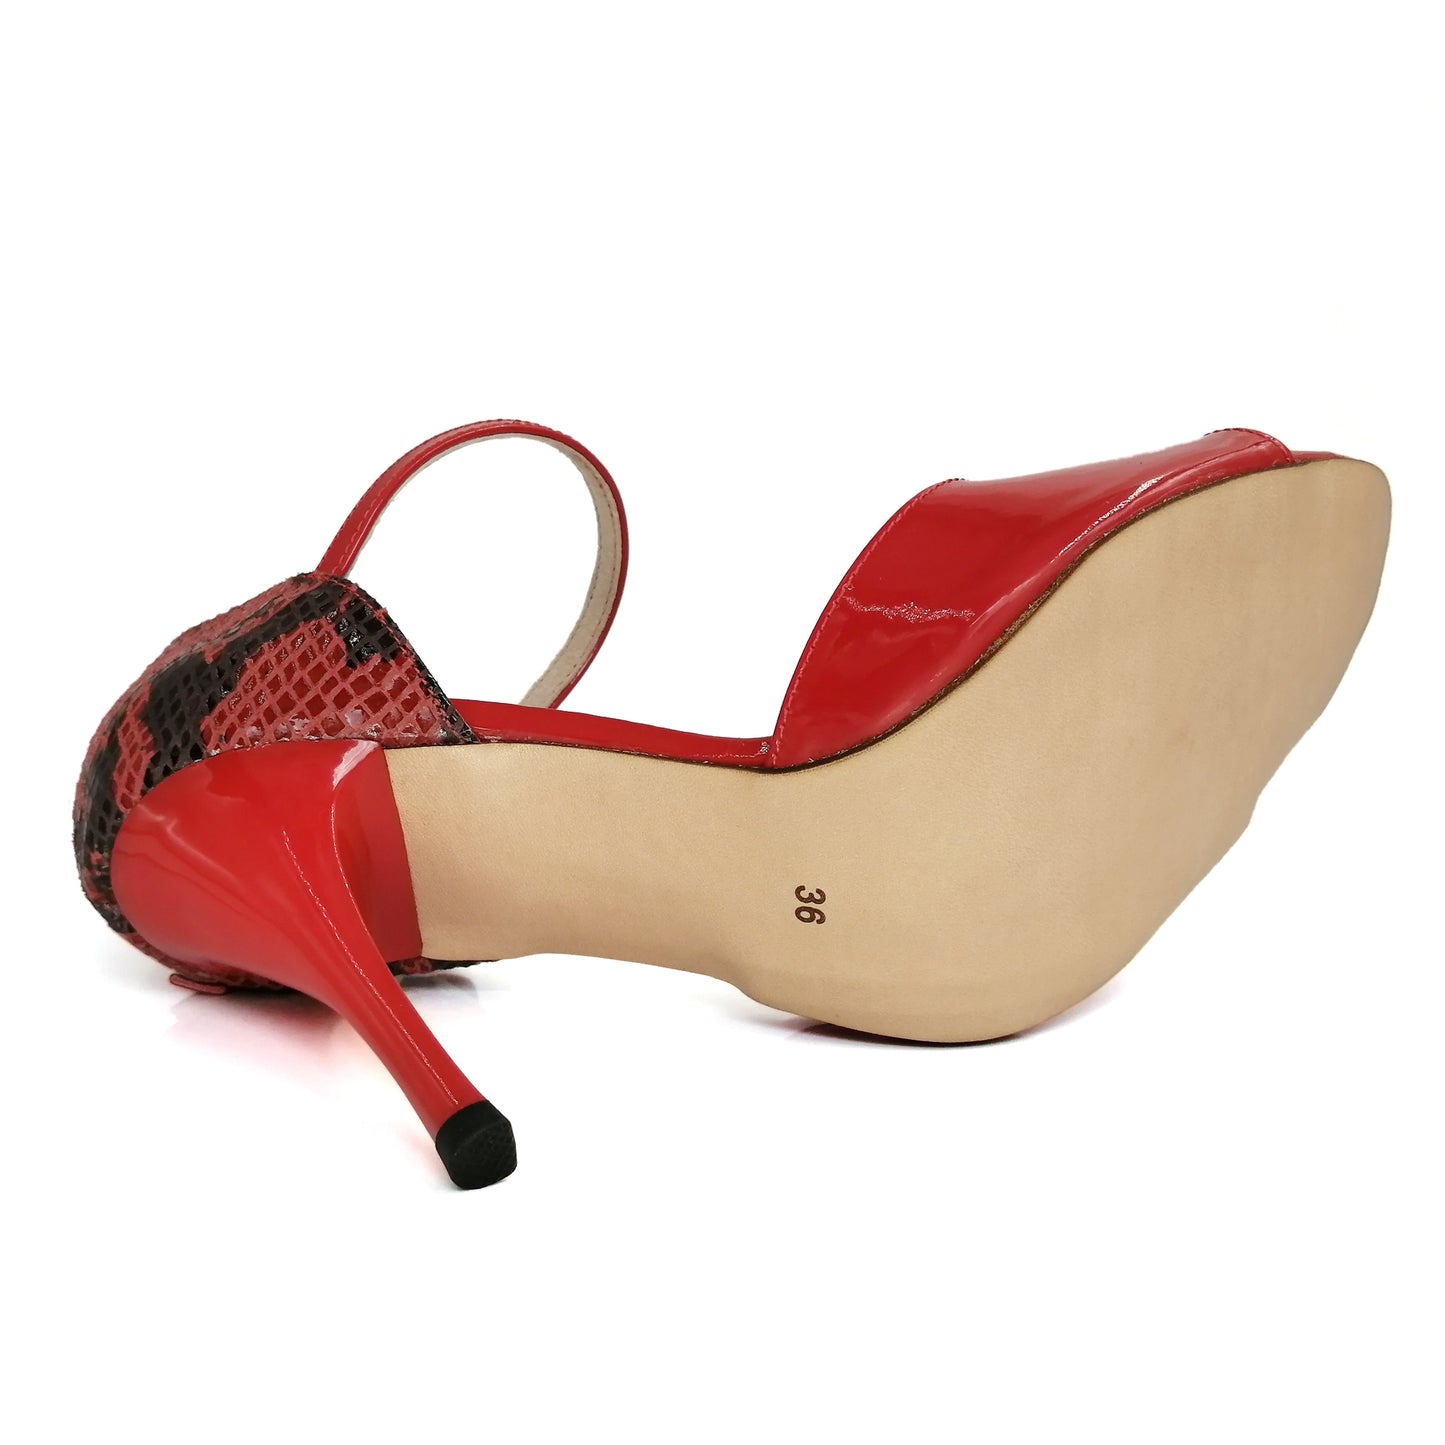 Pro Dancer Women's Argentine Tango Shoes High Heel Dance Sandals Leather Sole Red (PD9038A)